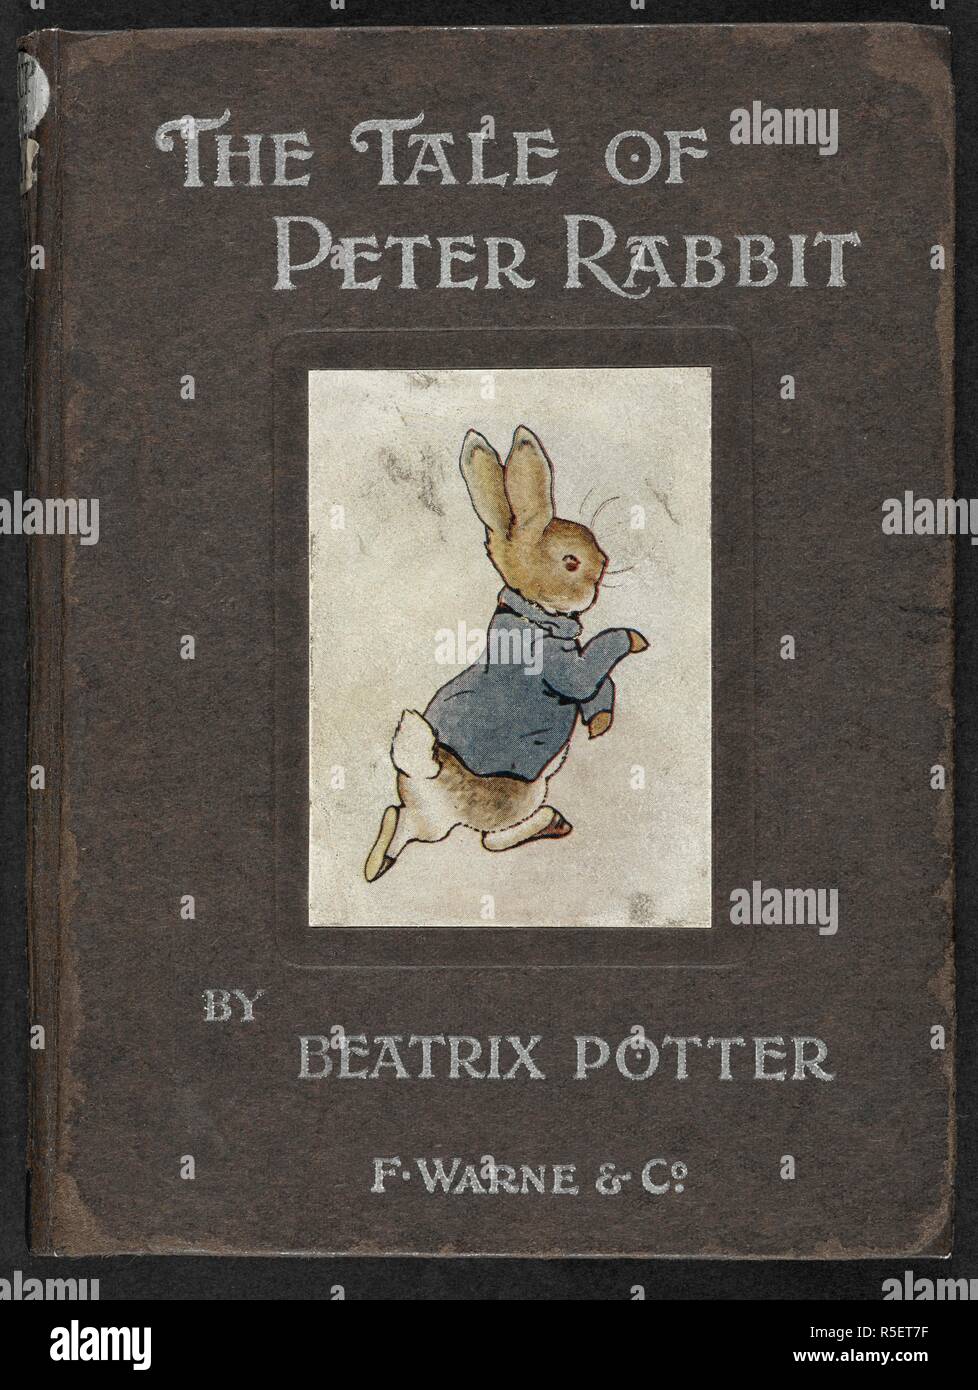 Front cover of 'The tale of Peter Rabbit'. The tale of Peter Rabbit by Beatrix Potter. London: Frederick Warne and Co. and New York, [1902] Edmund Evans, engraver and printer. Source: Cup.402.a.4, front cover. Language: English. Stock Photo